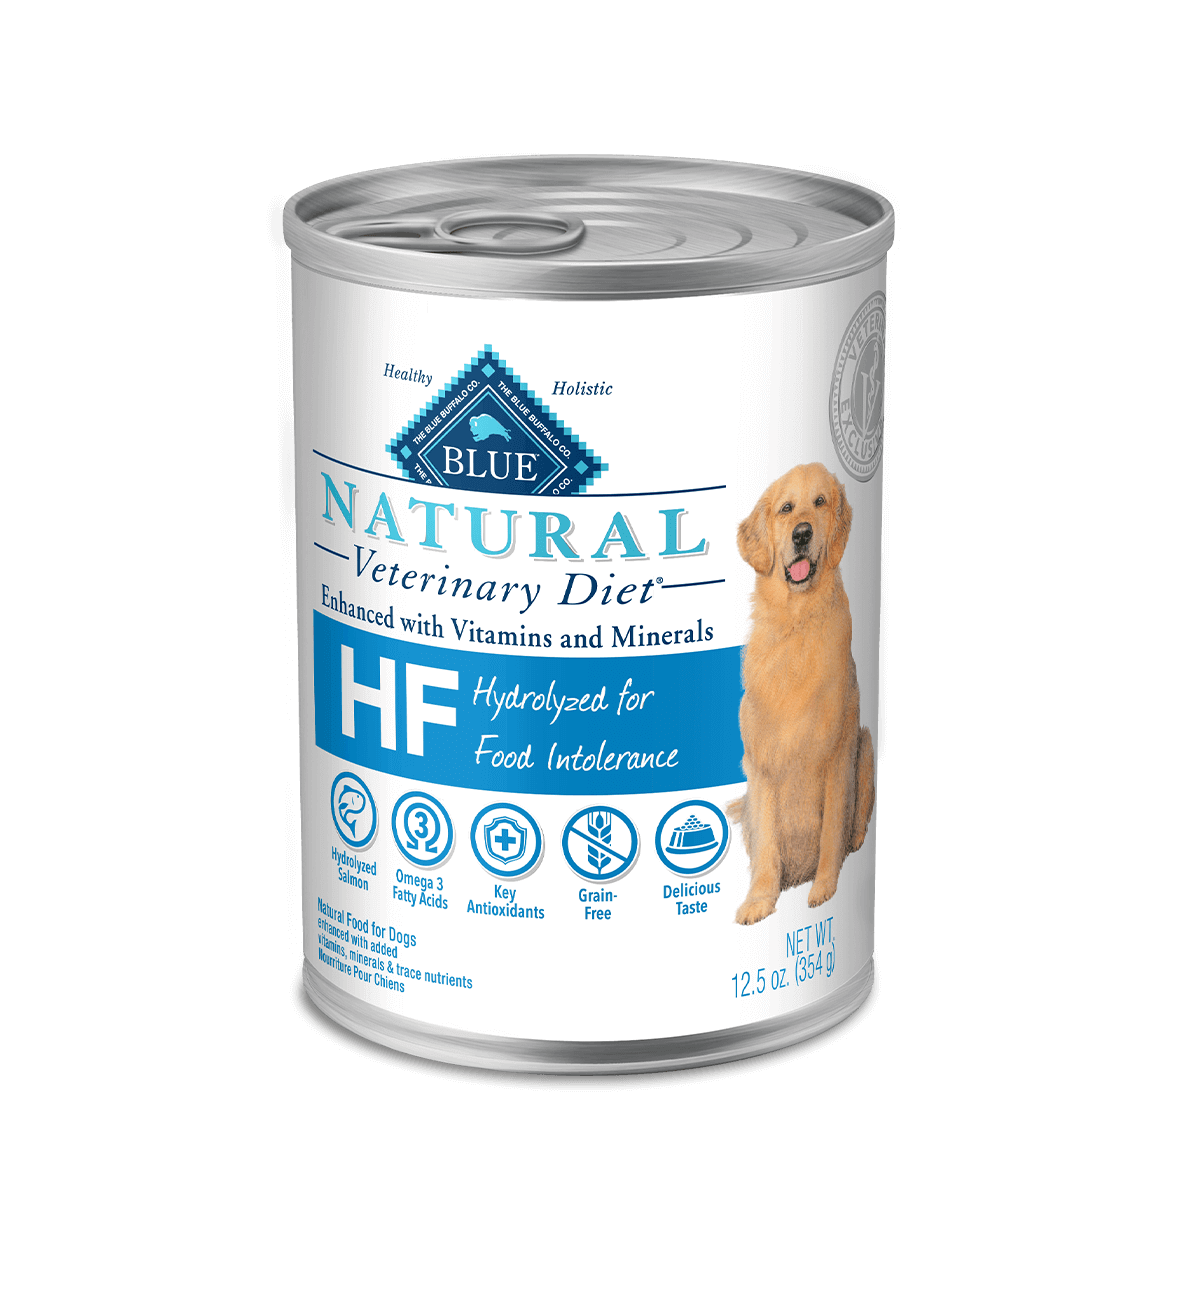 blue natural veterinary diet hf hydrolyzed for food intolerance dog wet food